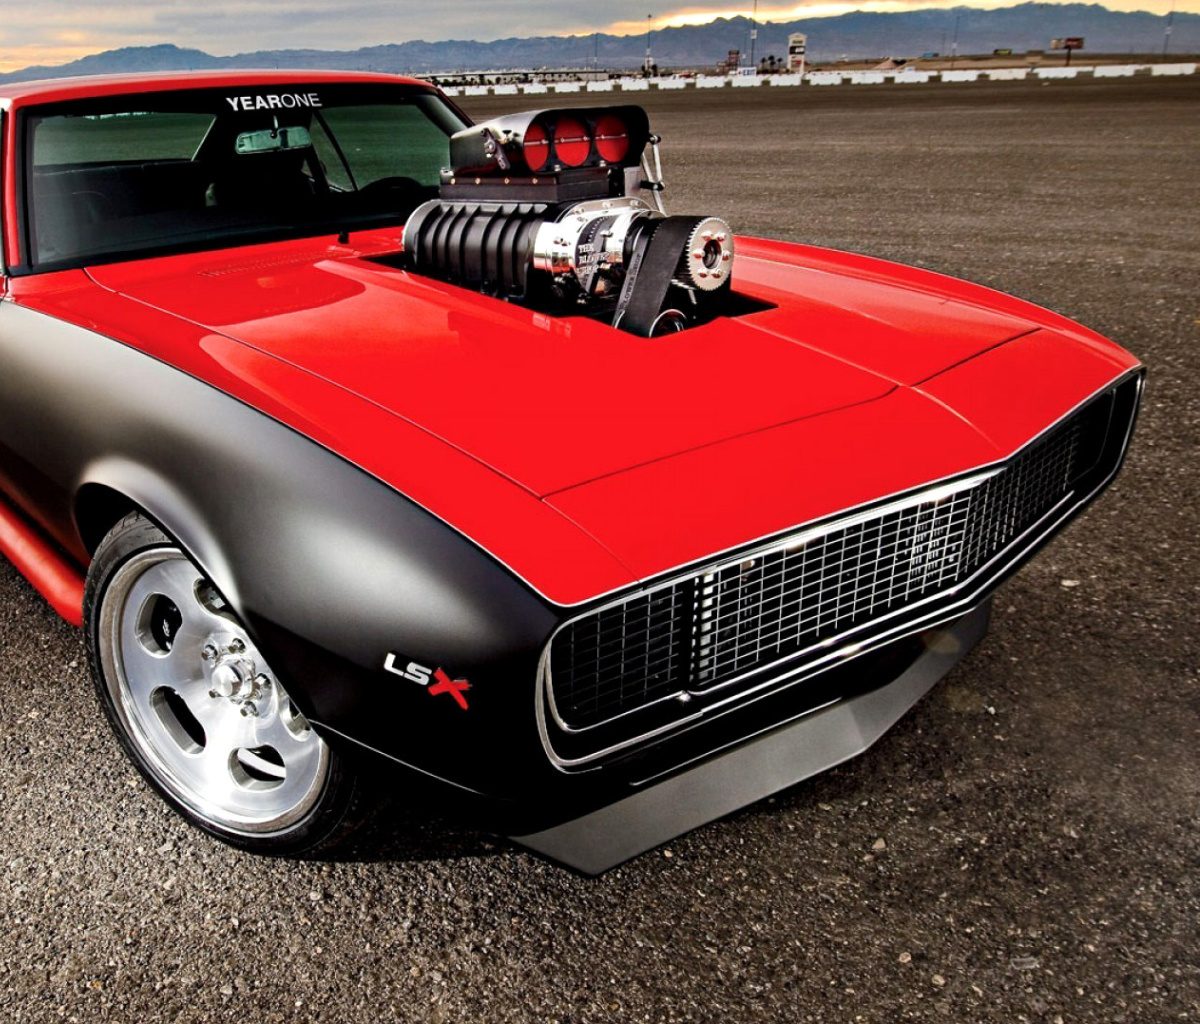 Chevrolet Hot Rod Muscle Car with GM Engine wallpaper 1200x1024